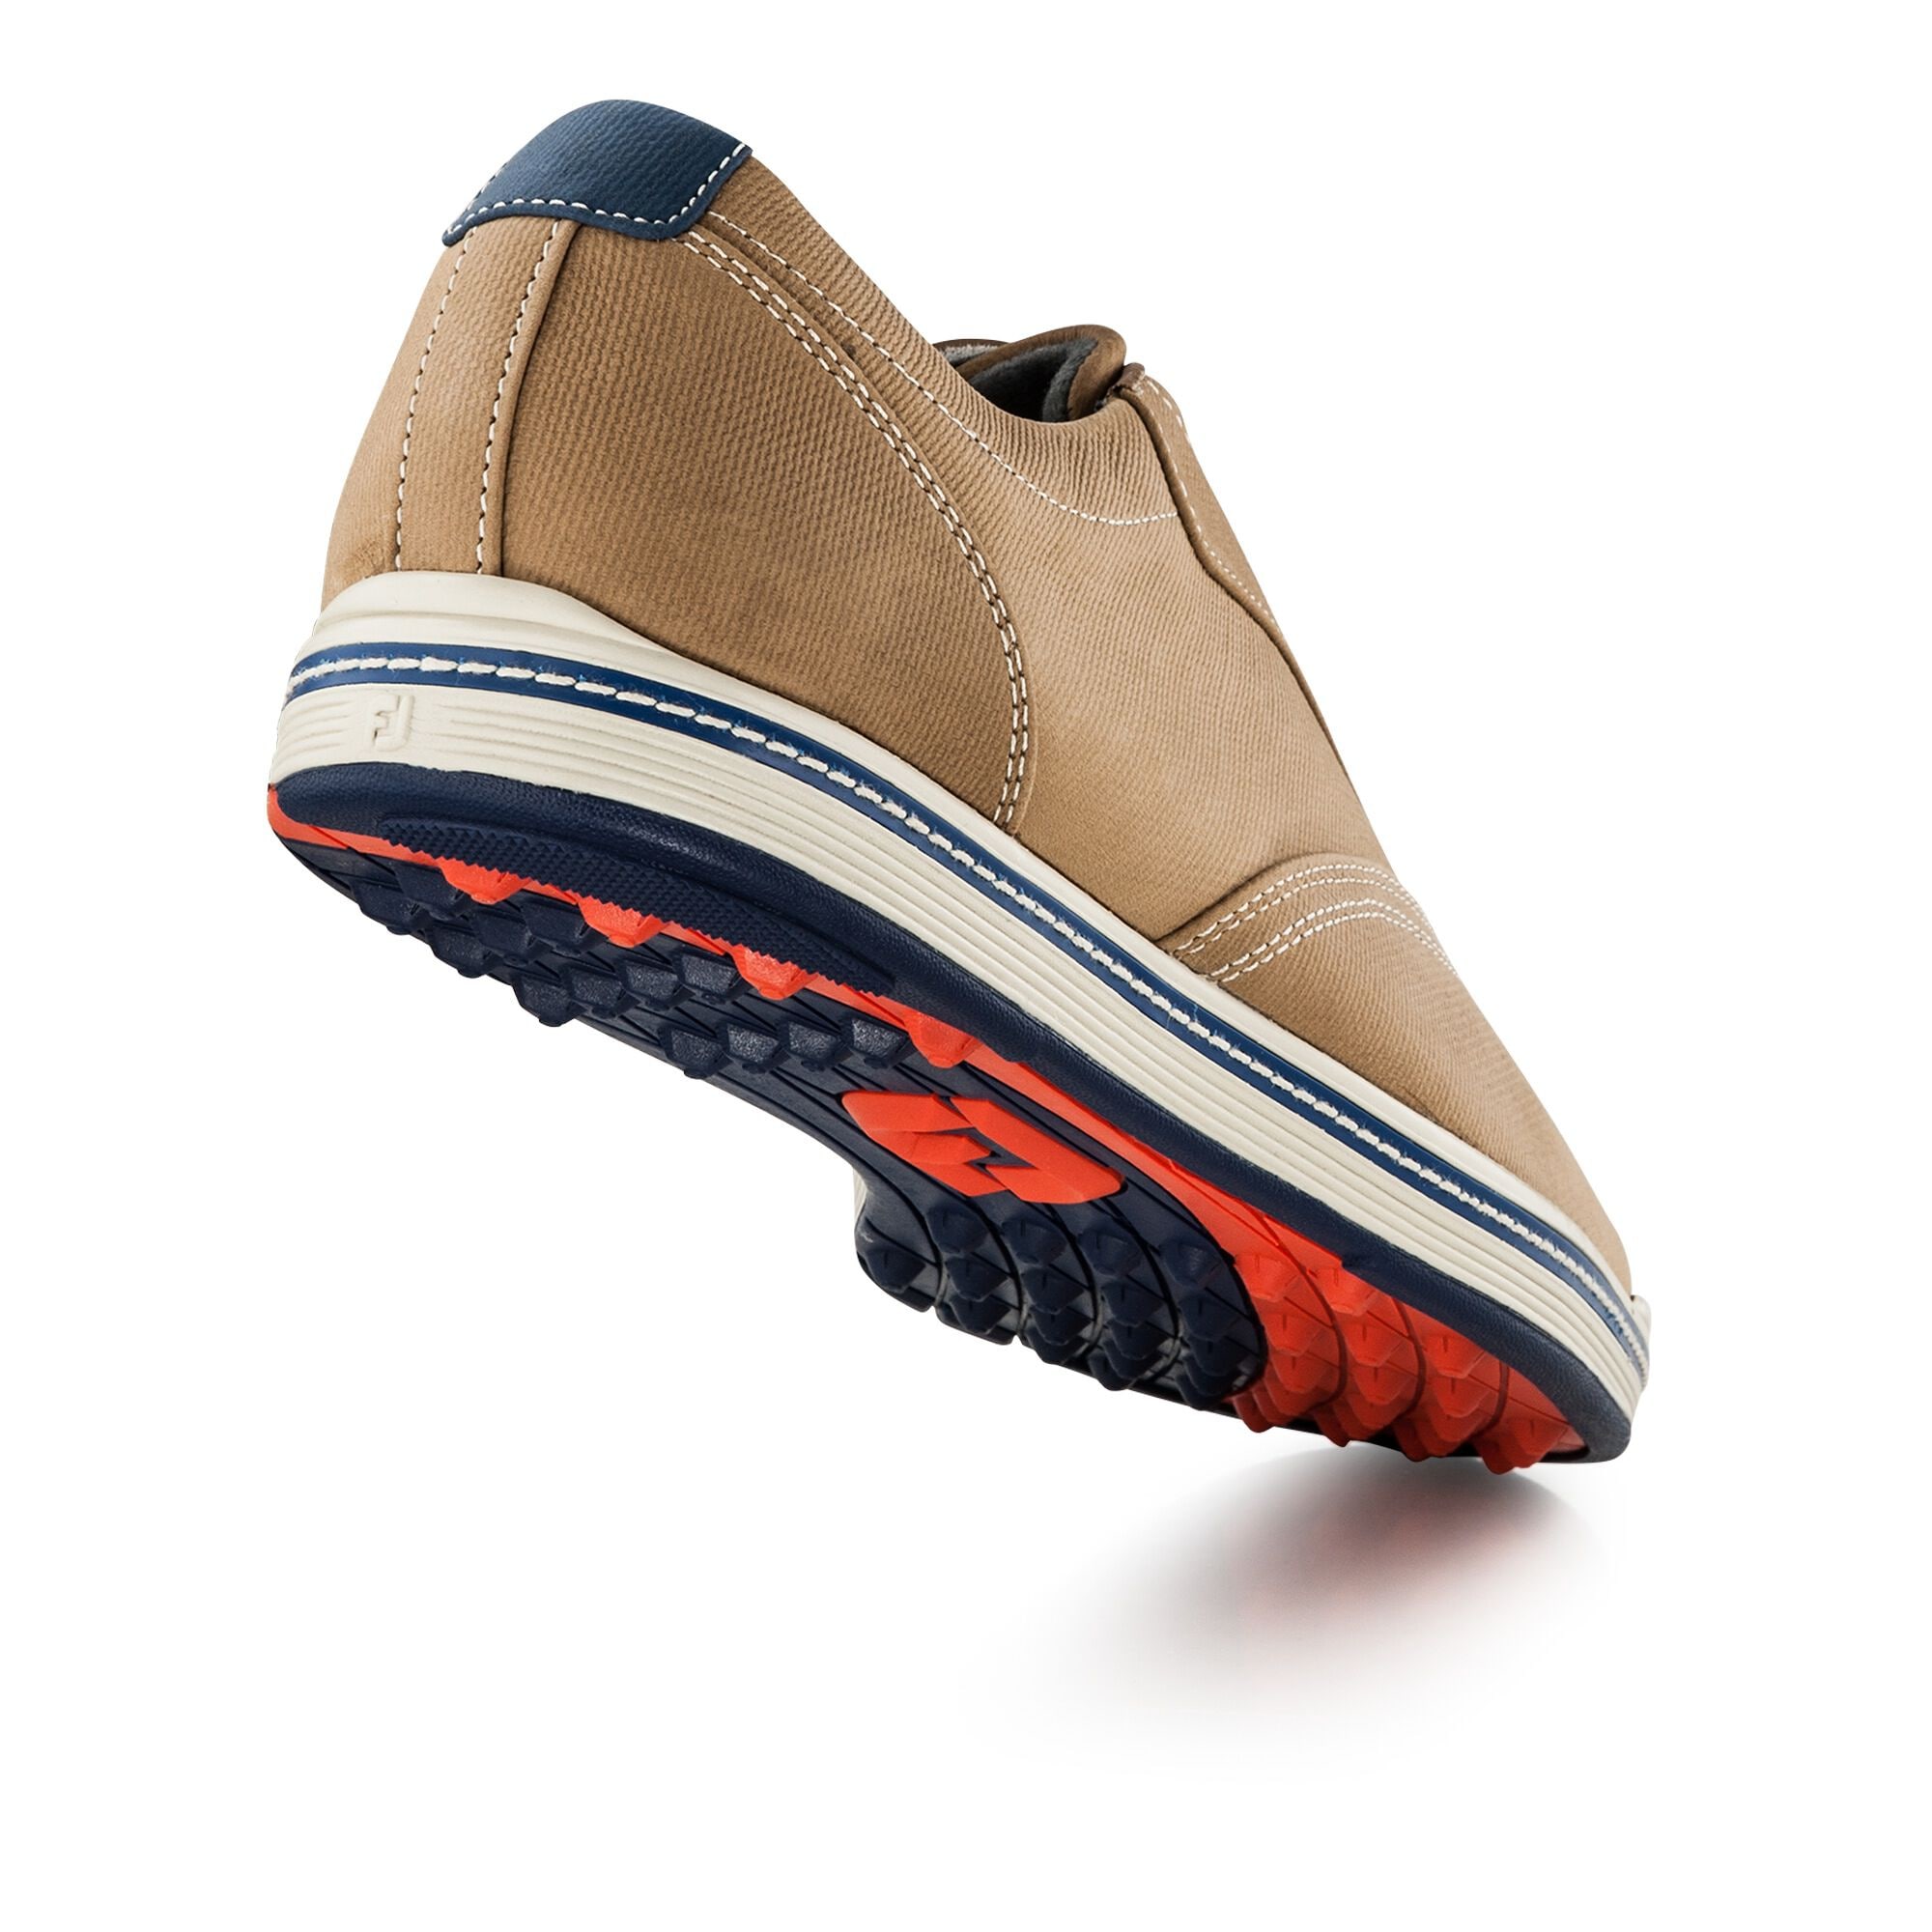 Contour Casual Spikeless Golf Shoes for Men | FootJoy